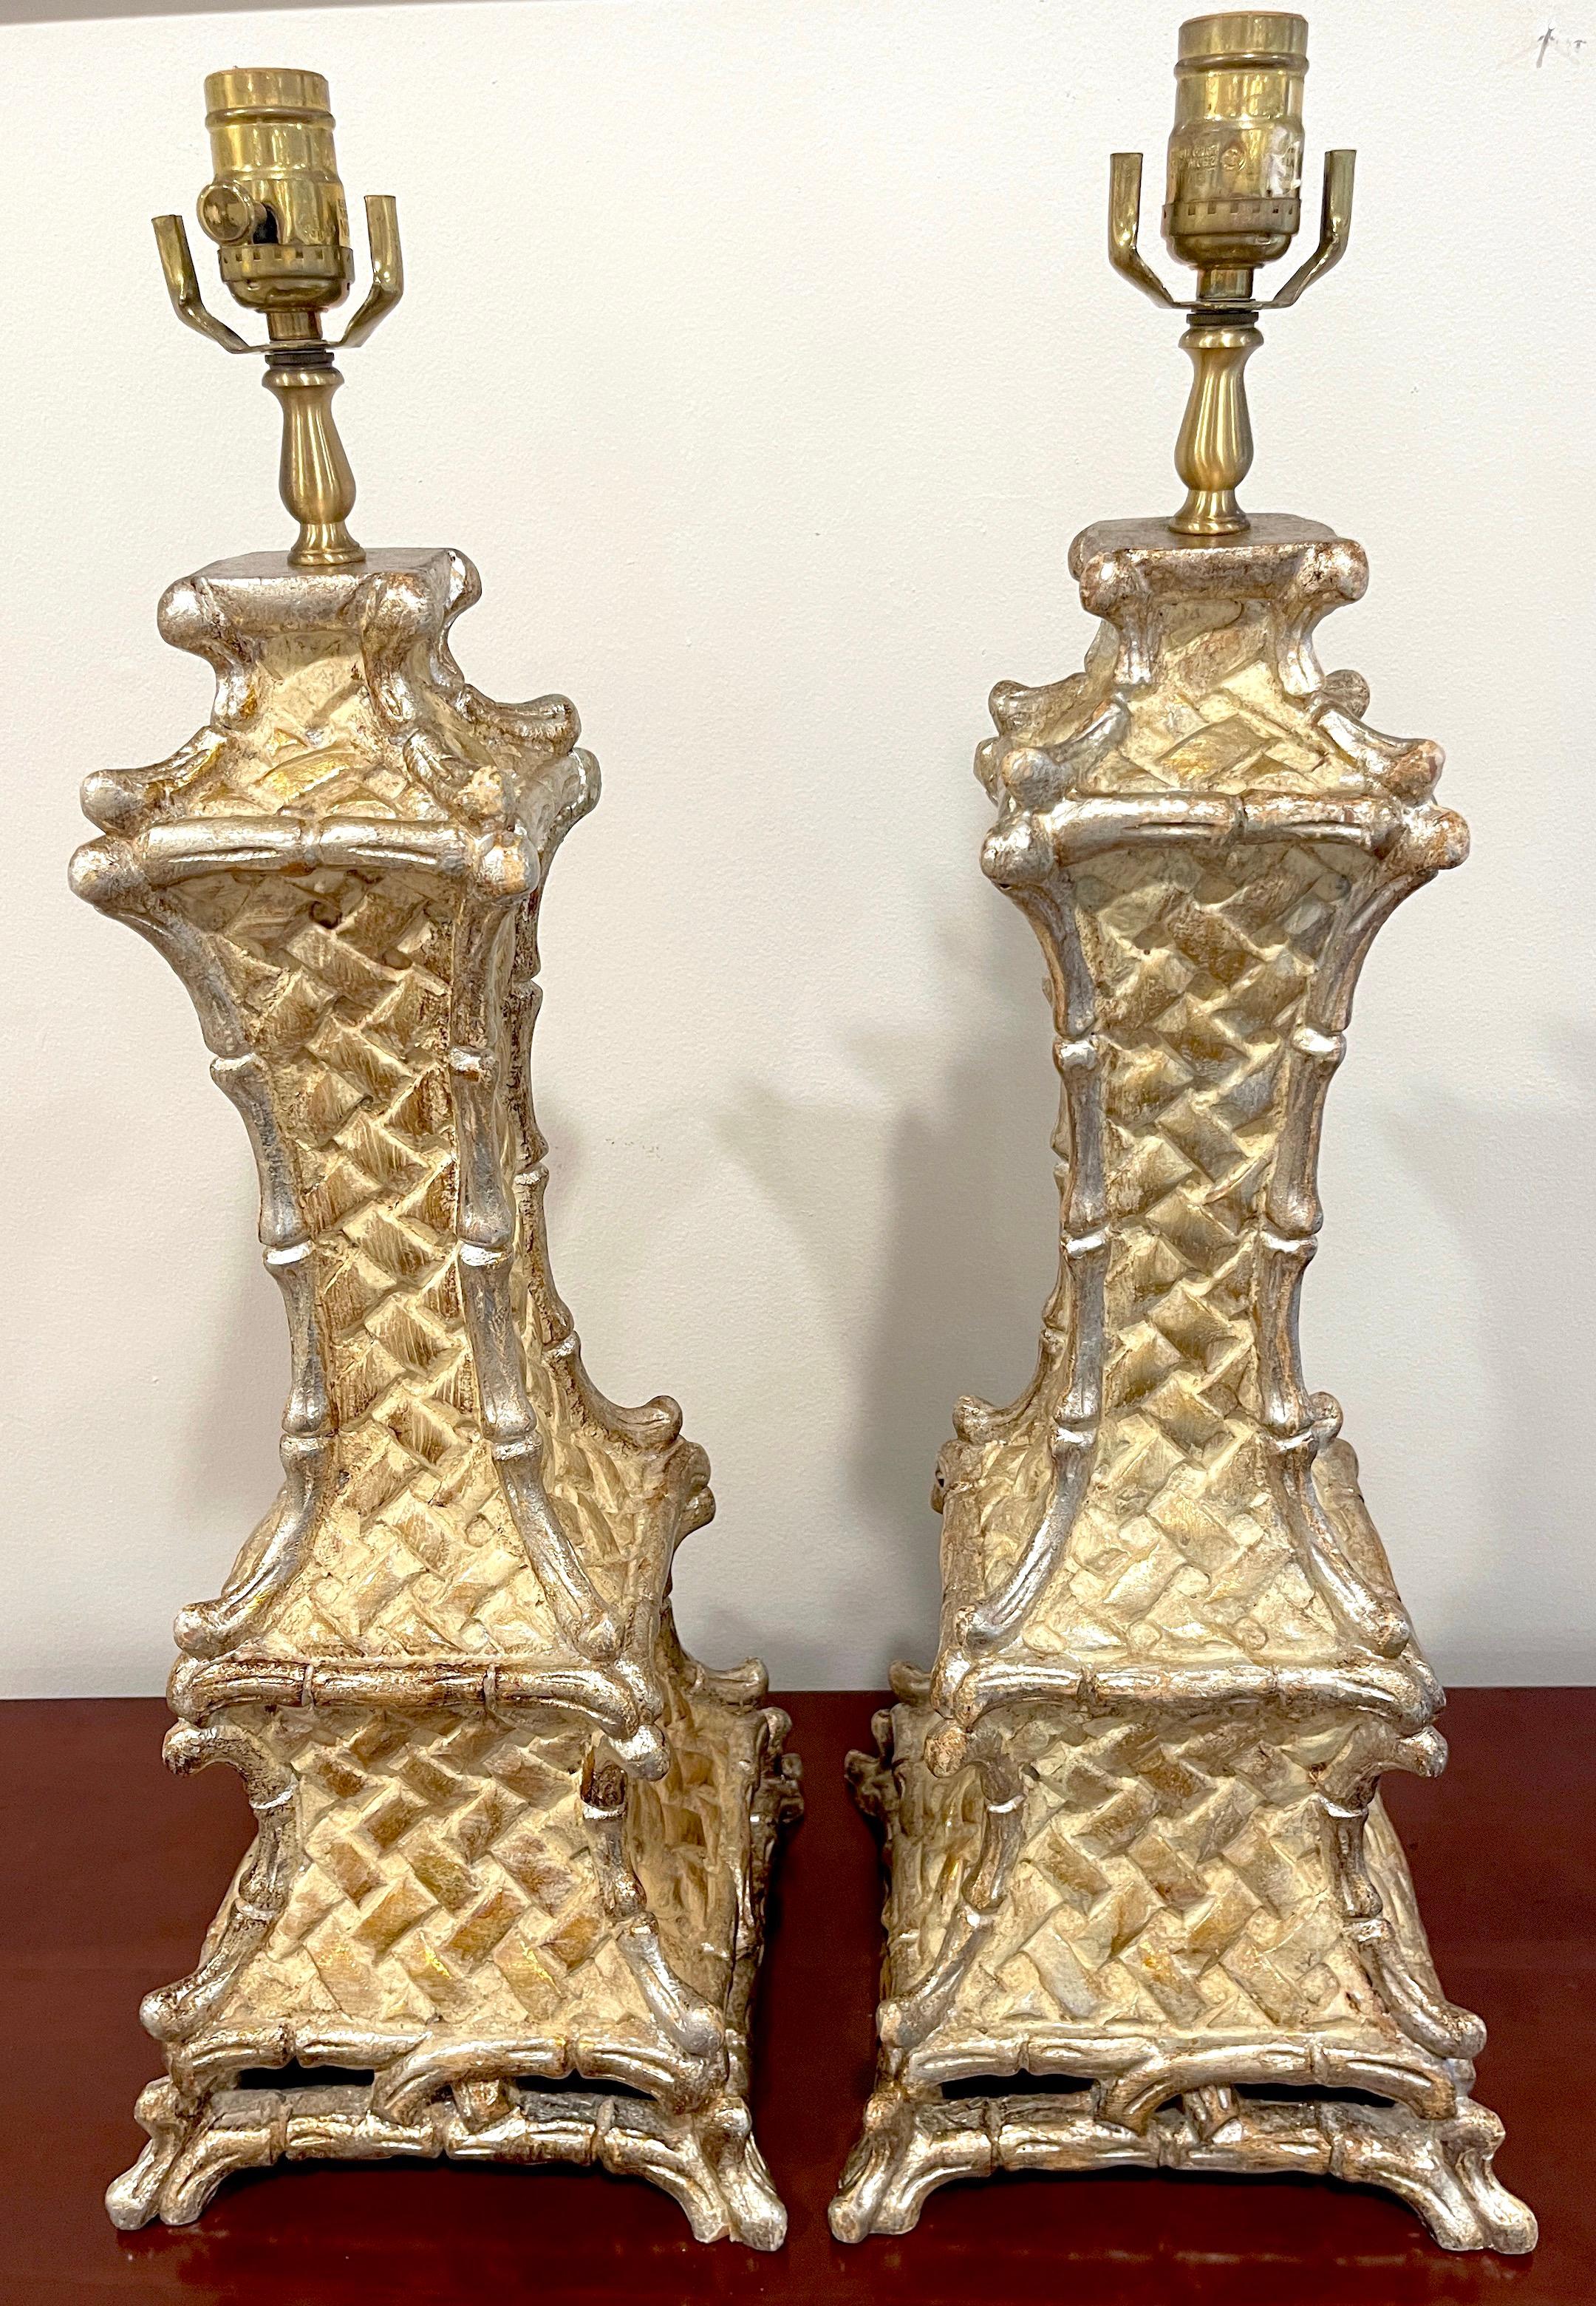 Pair of Italian Mid-Century Carved Giltwood Faux Bamboo Column lamps
Italy, circa 1960s

A very sheik pair of carved giltwood with silver leaf trim faux bamboo pagoda column lamps. 

Ready to shade and place, New wiring. 

Overall